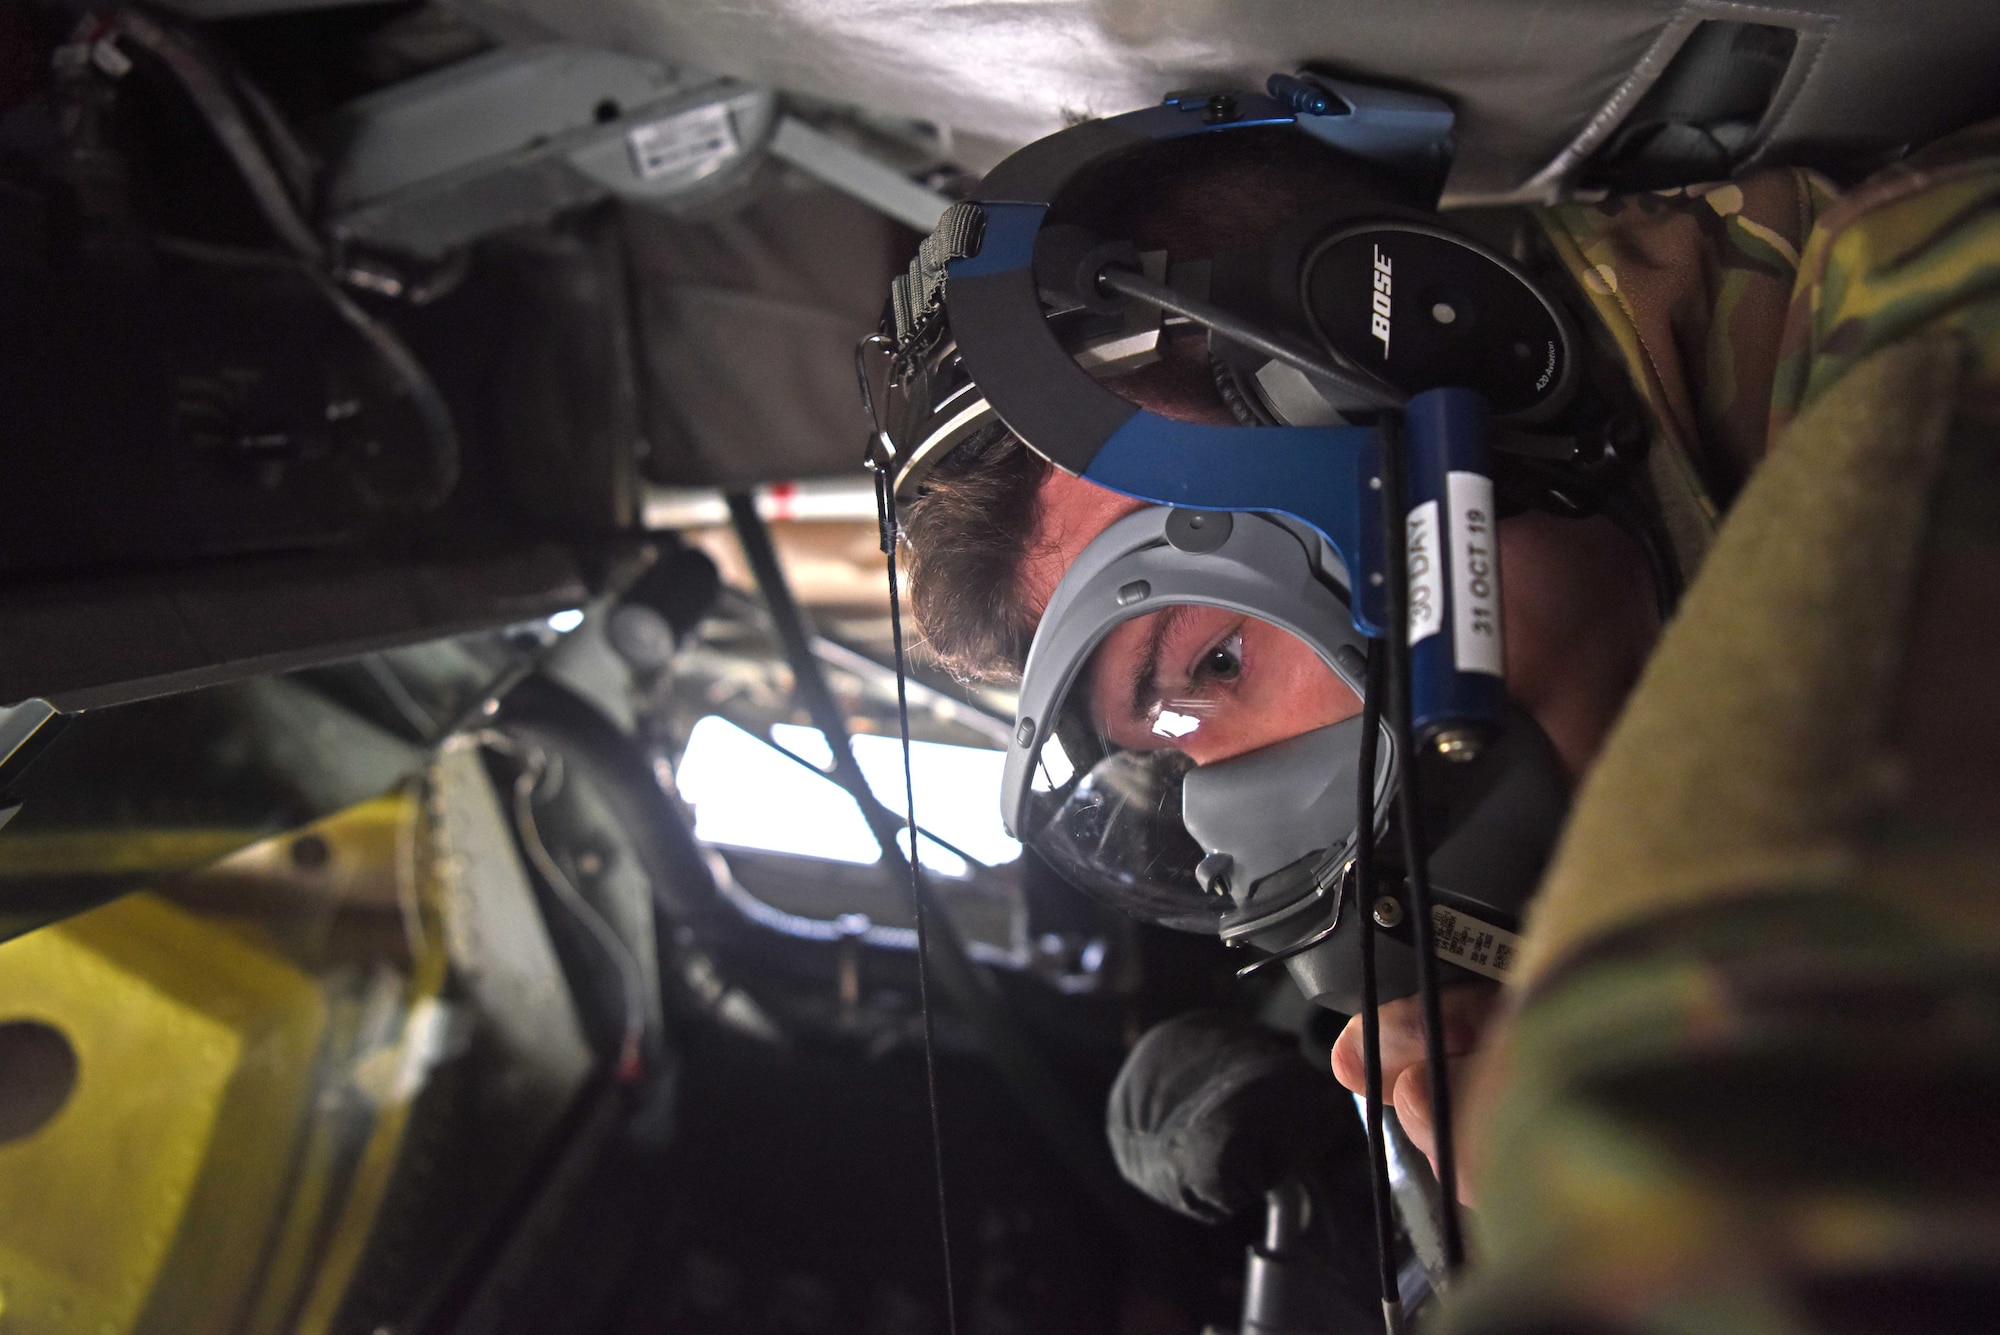 Airman 1st Class Benjamin Blake, 351st Air Refueling Squadron boom operator, checks his oxygen mask prior to takeoff during a readiness exercise at RAF Mildenhall, England, Oct. 3, 2019. Exercise scenarios were designed to ensure 100th Air Refueling Wing Airmen were fully prepared for potential contingencies in the wing’s area of responsibility. (U.S. Air Force photo by Airman 1st Class Brandon Esau)